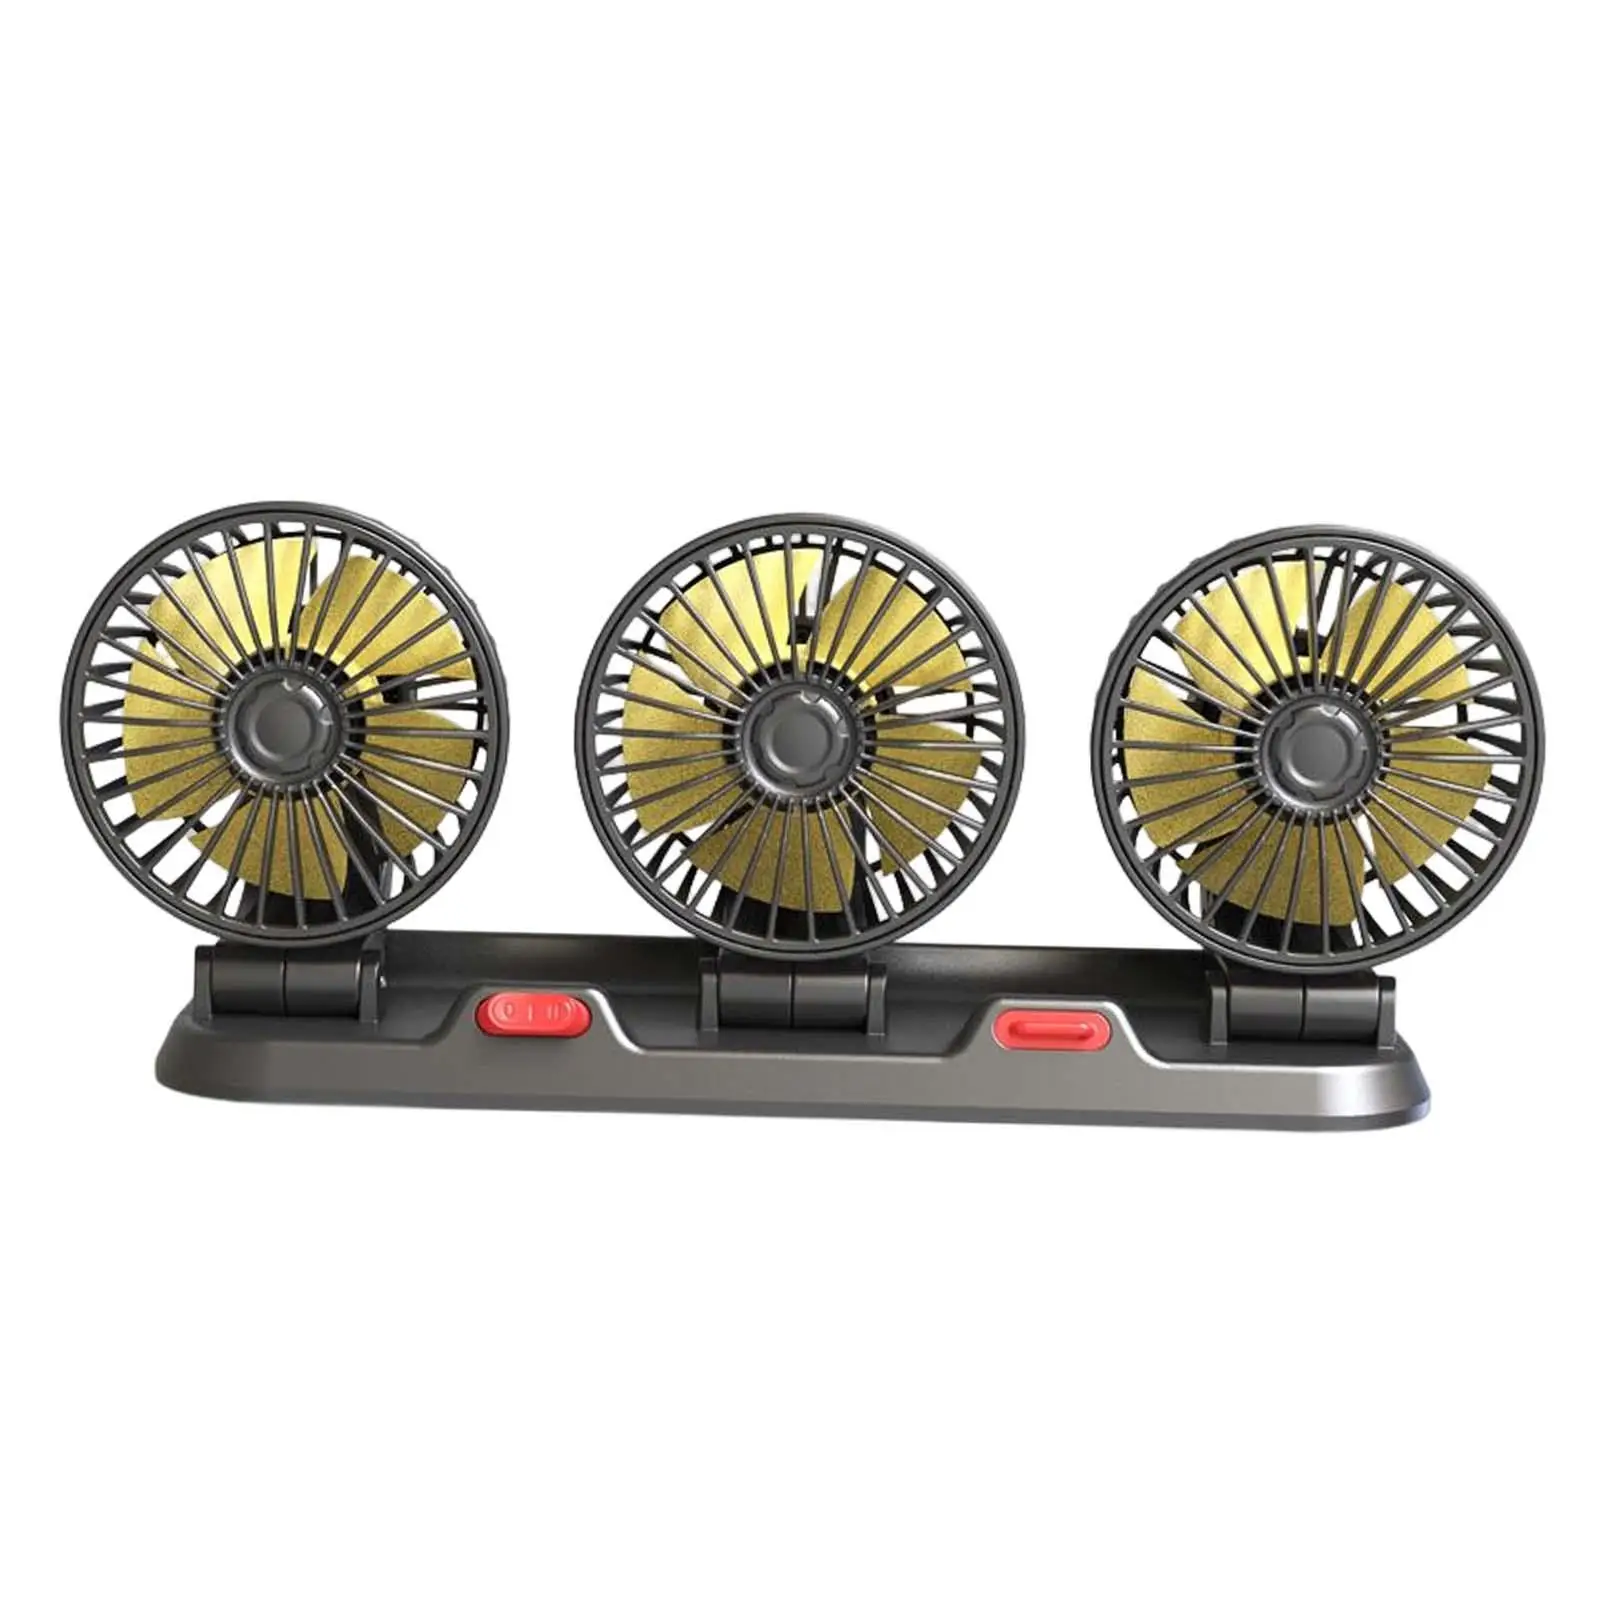 Car Air Circulation 360 Rotation 3 Head Powerful Auto Car Fans Personal Cooling Vehicle Fan Quiet for Bus Van Truck